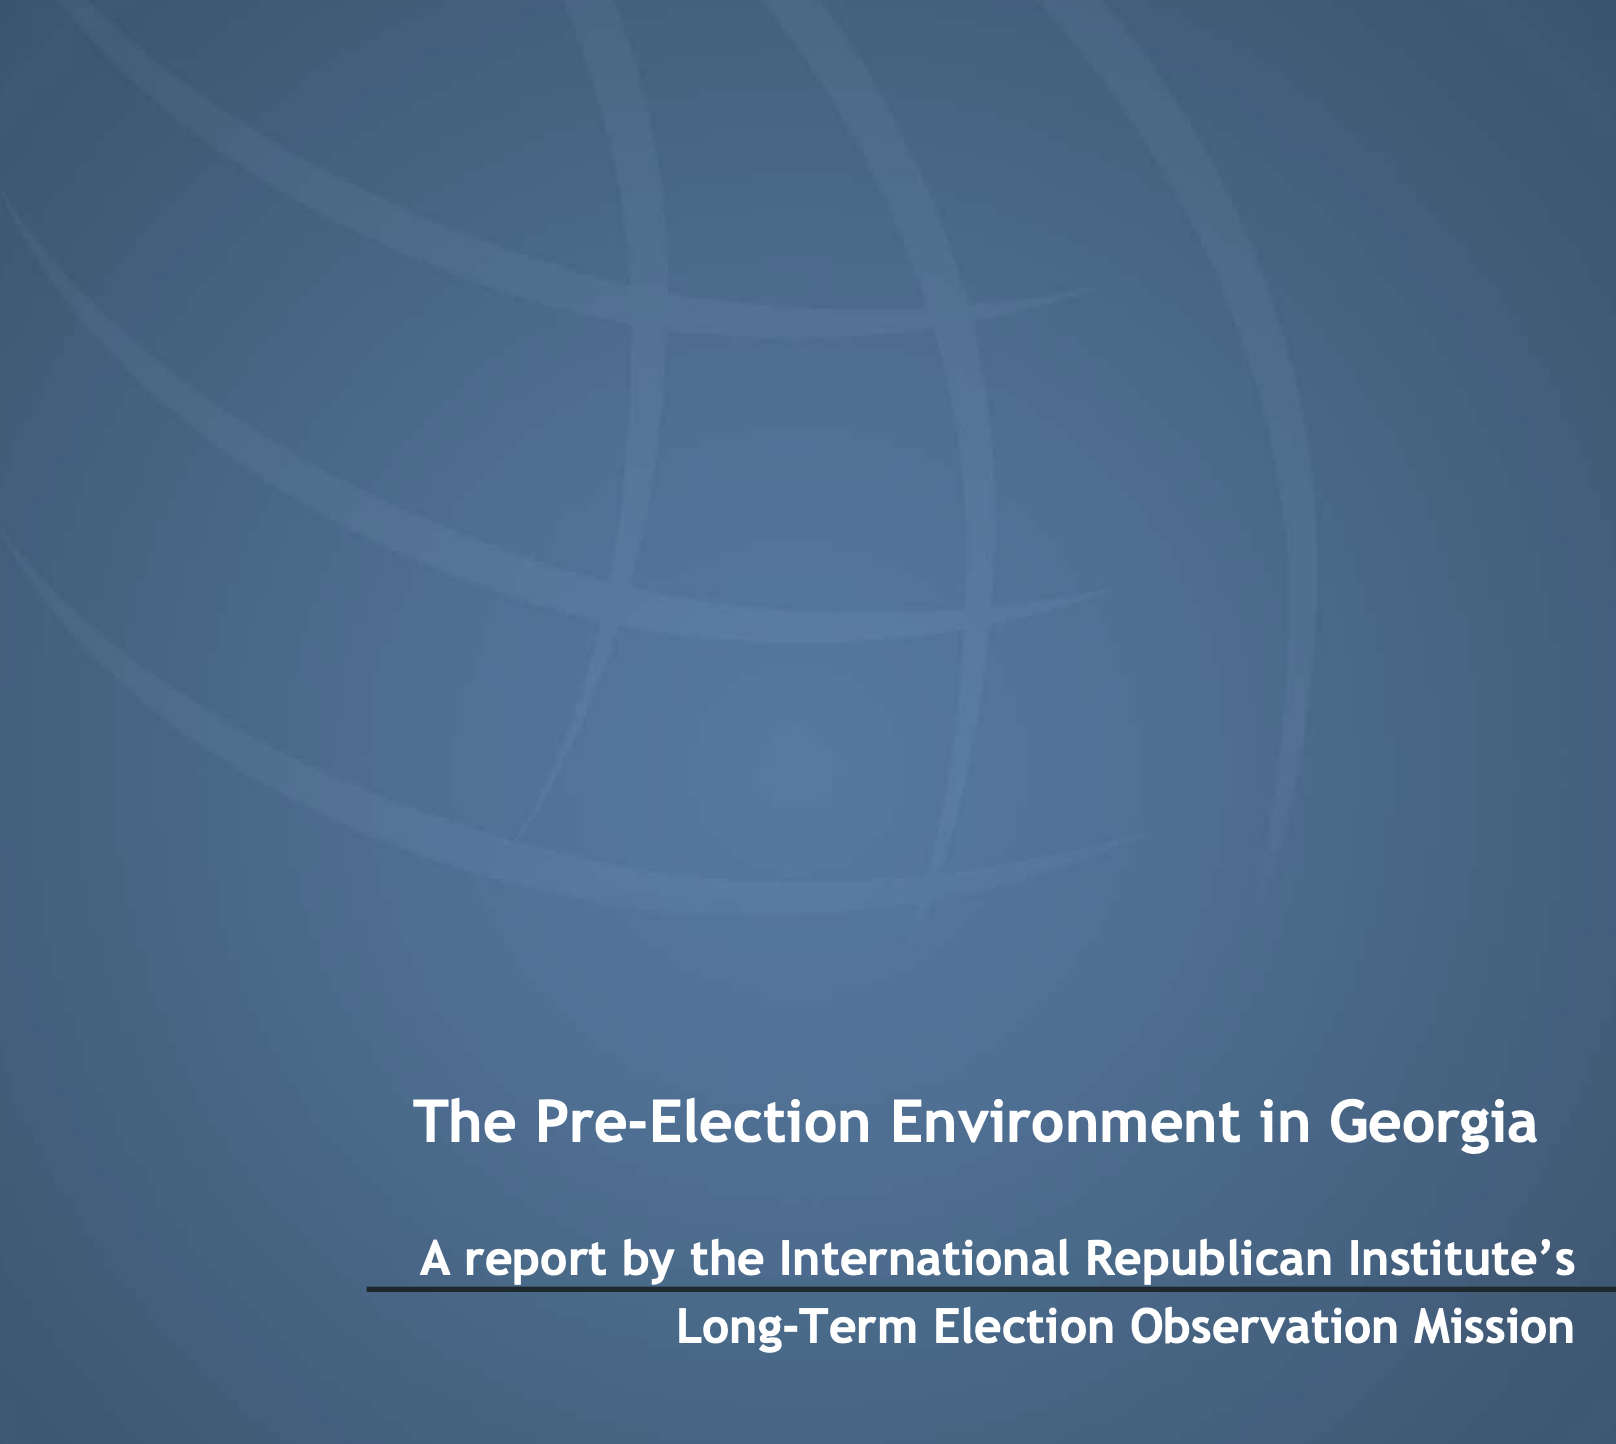 The Pre-Election Environment in Georgia A report by the International Republican Institute’s Long-Term Election Observation Mission